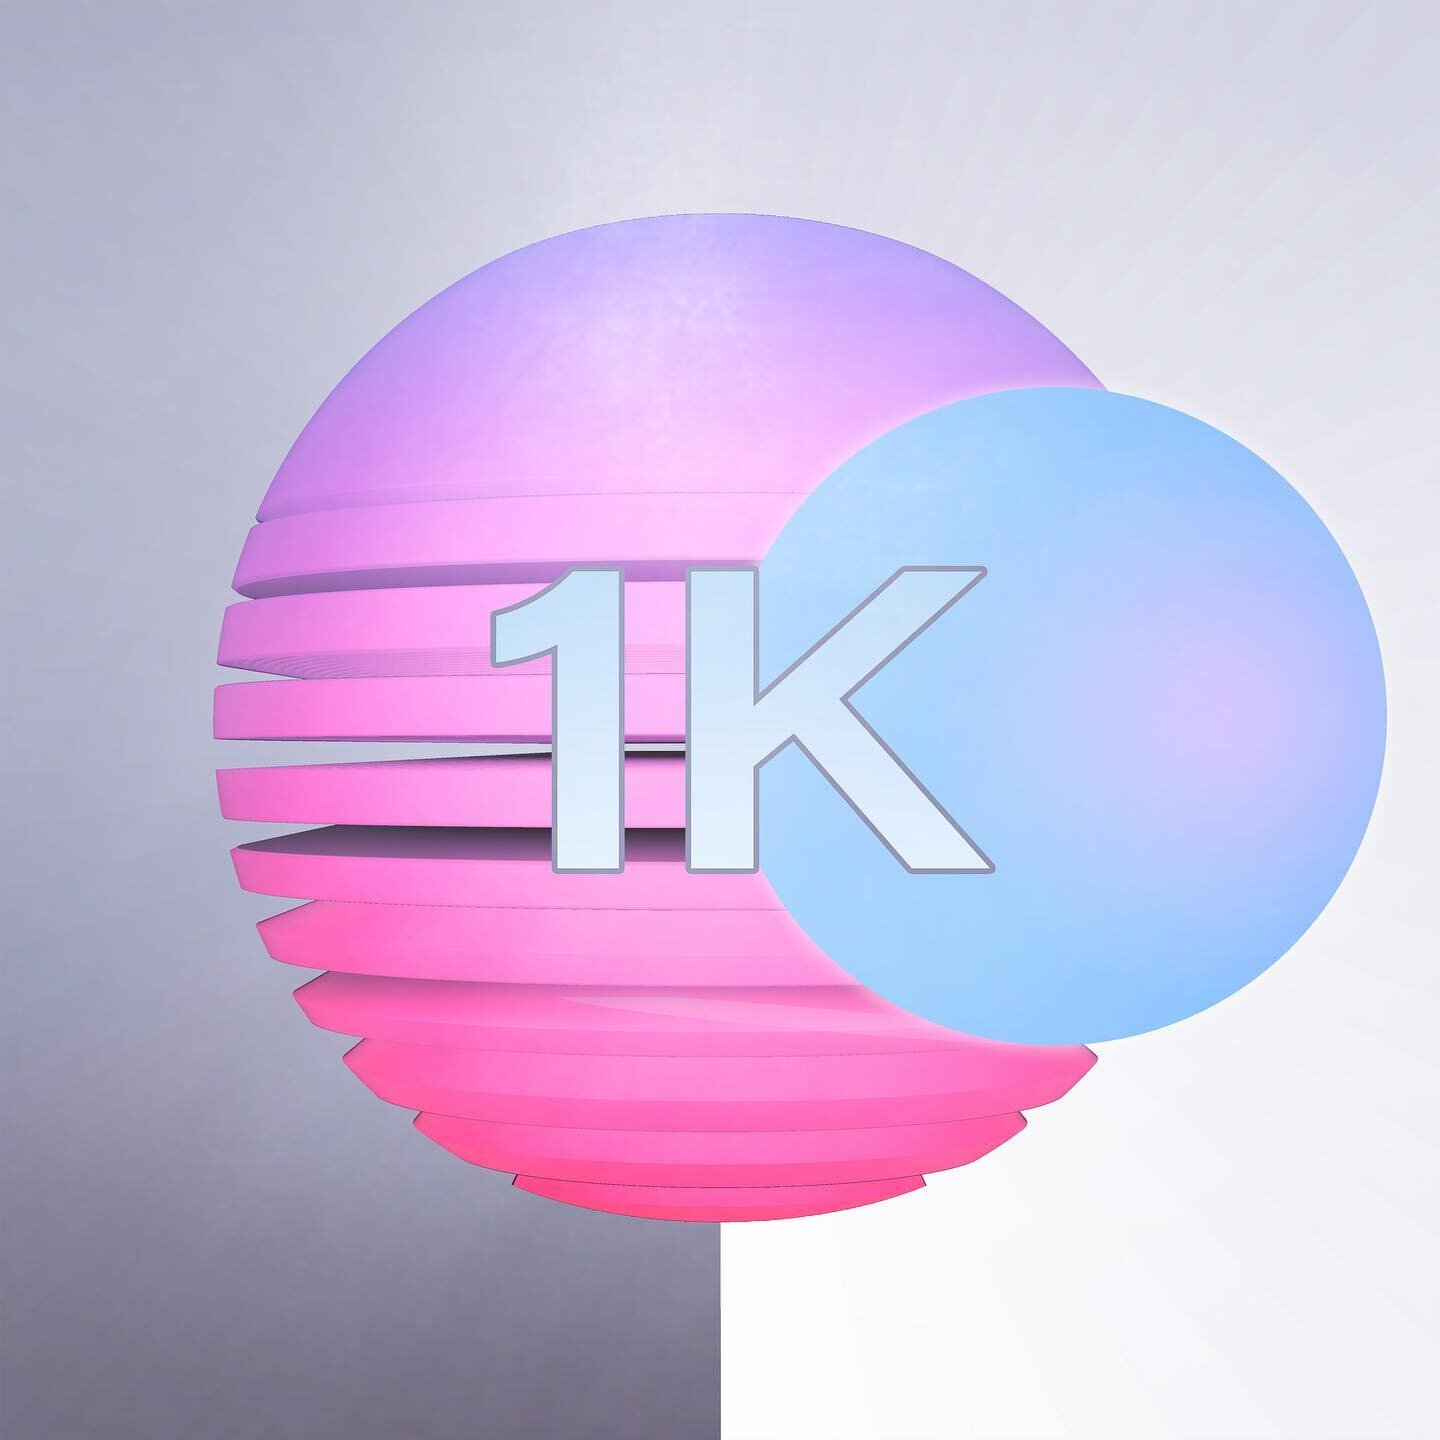 We just reached 1000 followers! I never imagined my music would reach so many people. Thank you very much for all the support! I&rsquo;m incredibly excited &mdash; lots of great new synthwave and shredwave music is on the way, as well as some fun new